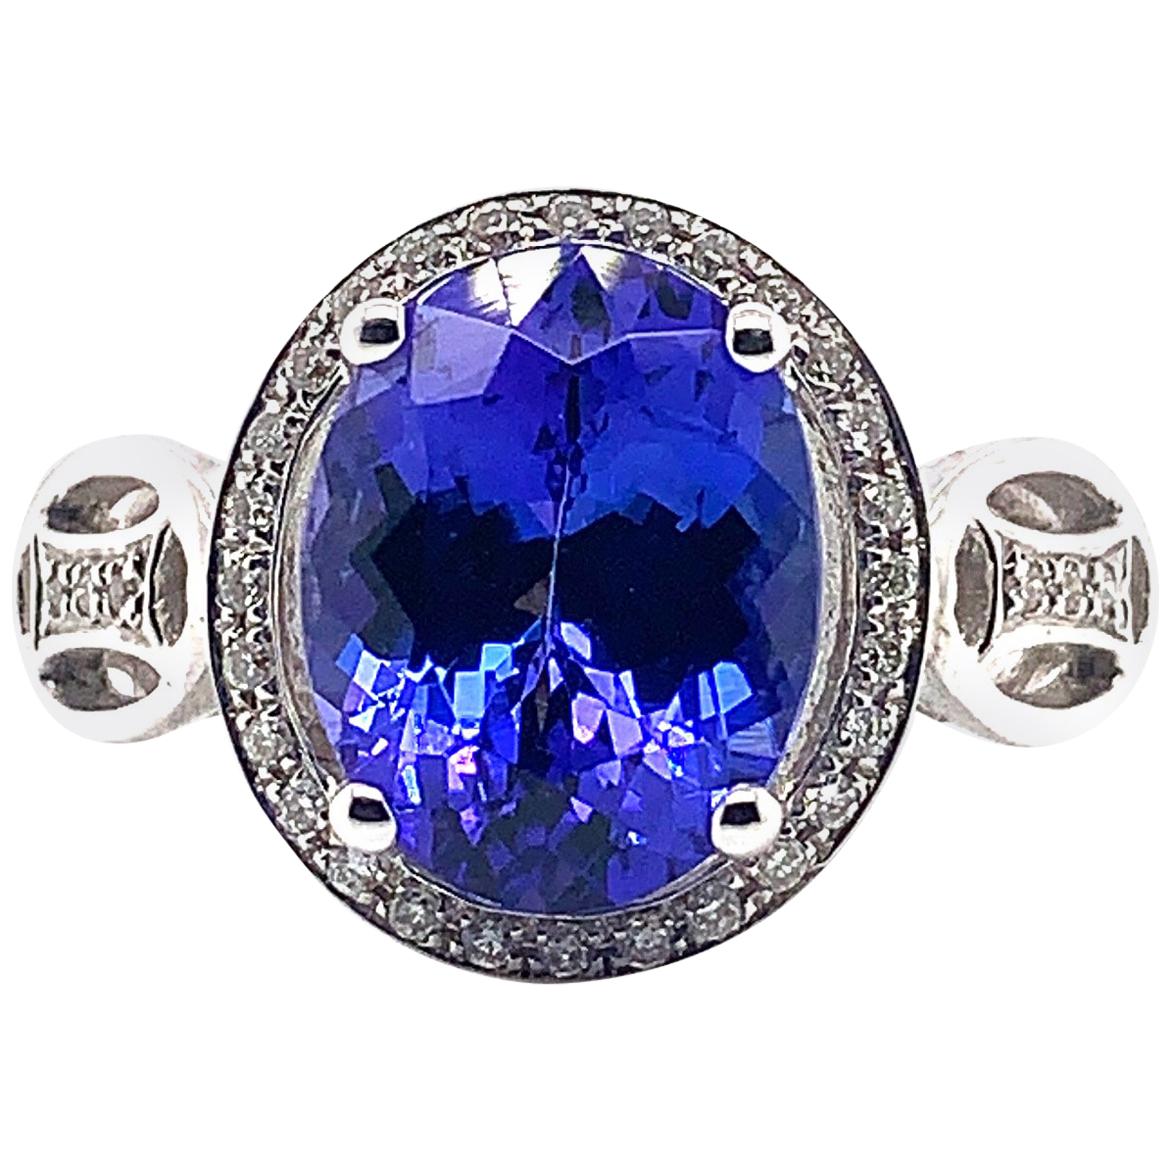 2.790 Carat Oval Shaped Tanzanite Ring in 18 Karat White Gold with Diamonds For Sale